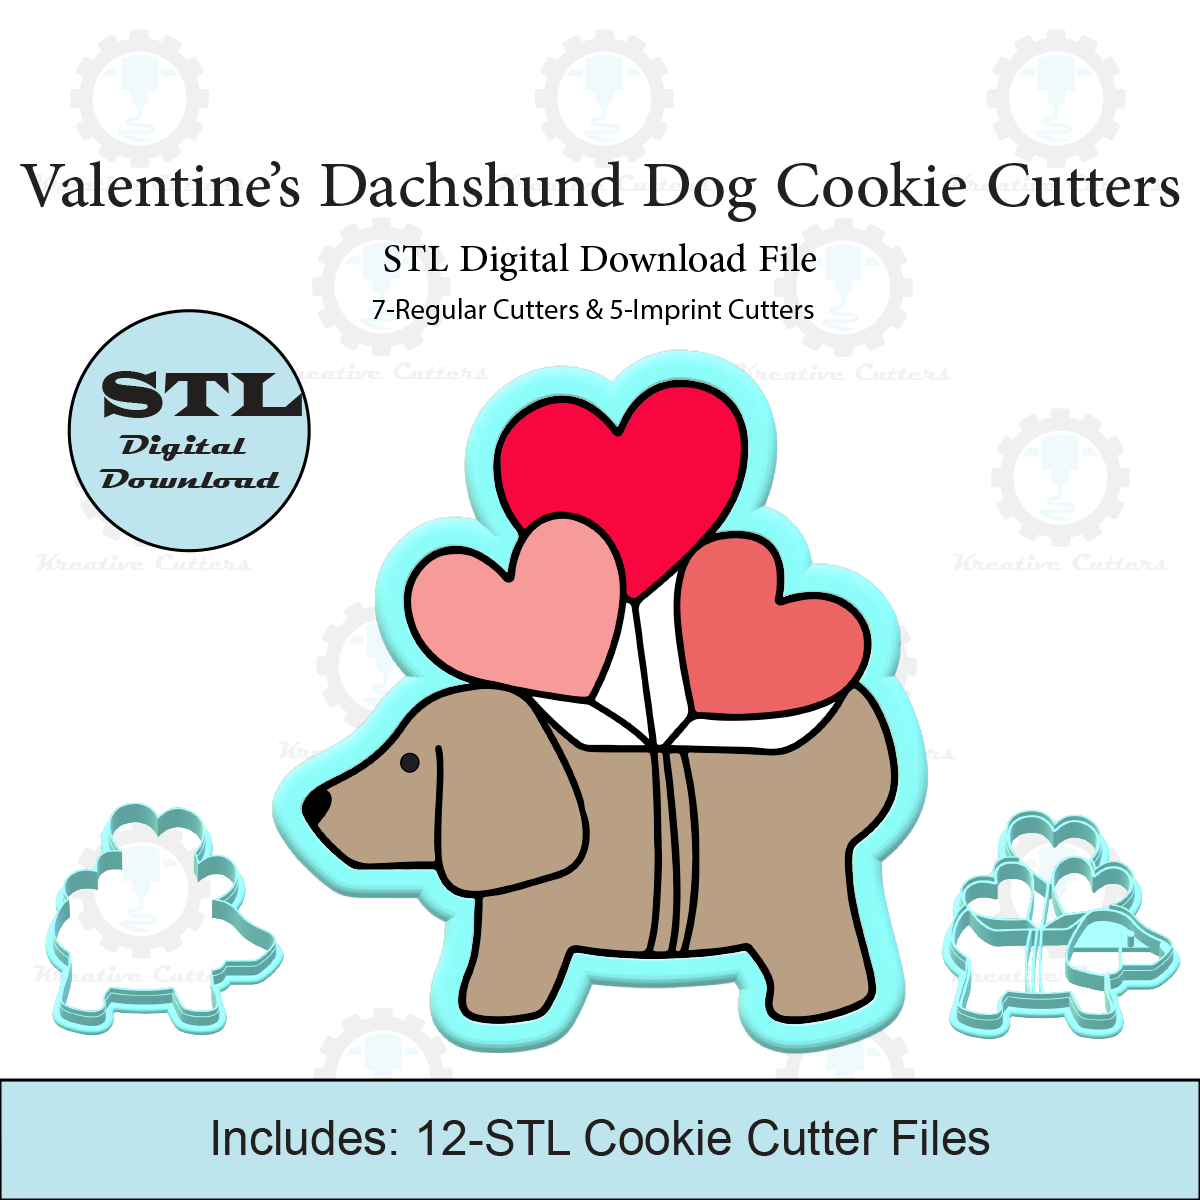 Valentines Dachshund Dog Cookie Cutters | Standard & Imprint Cutters Included | STL Files